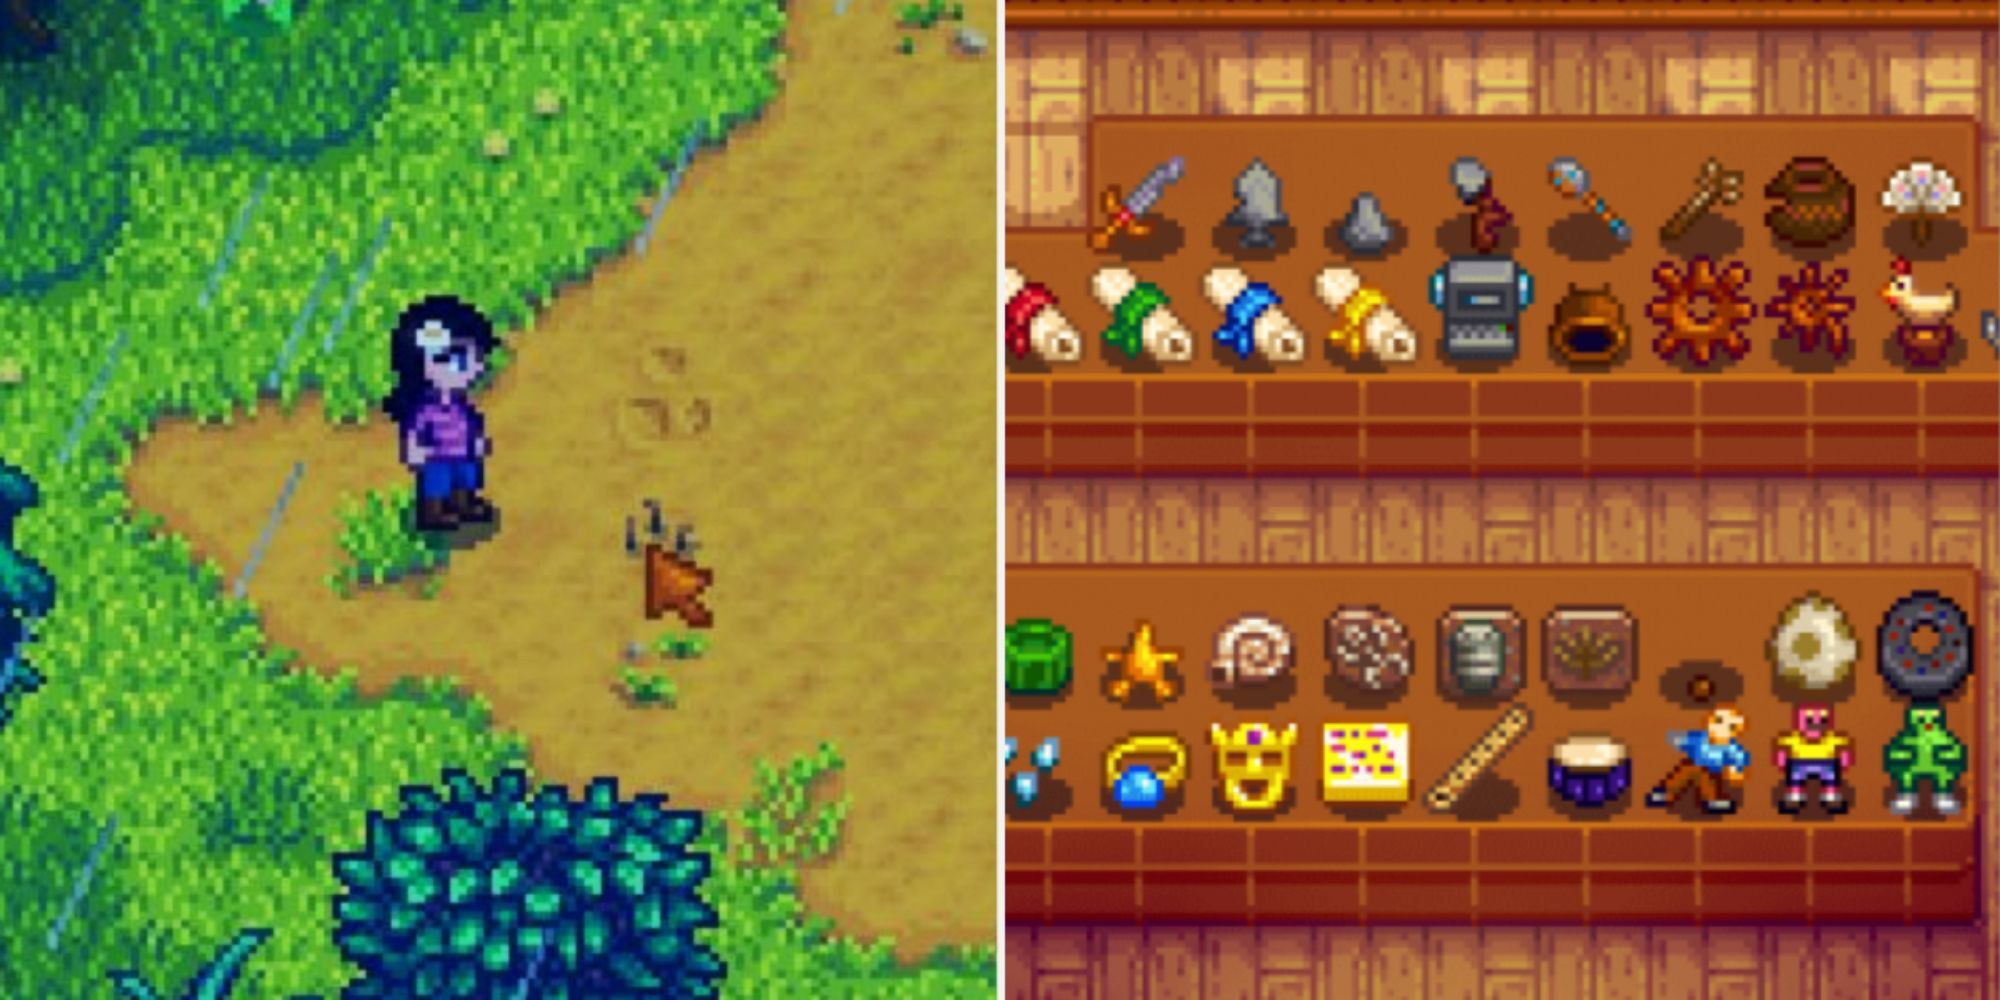 Stardew Valley Artifact Dig Spot And Artifacts On Display At Museum